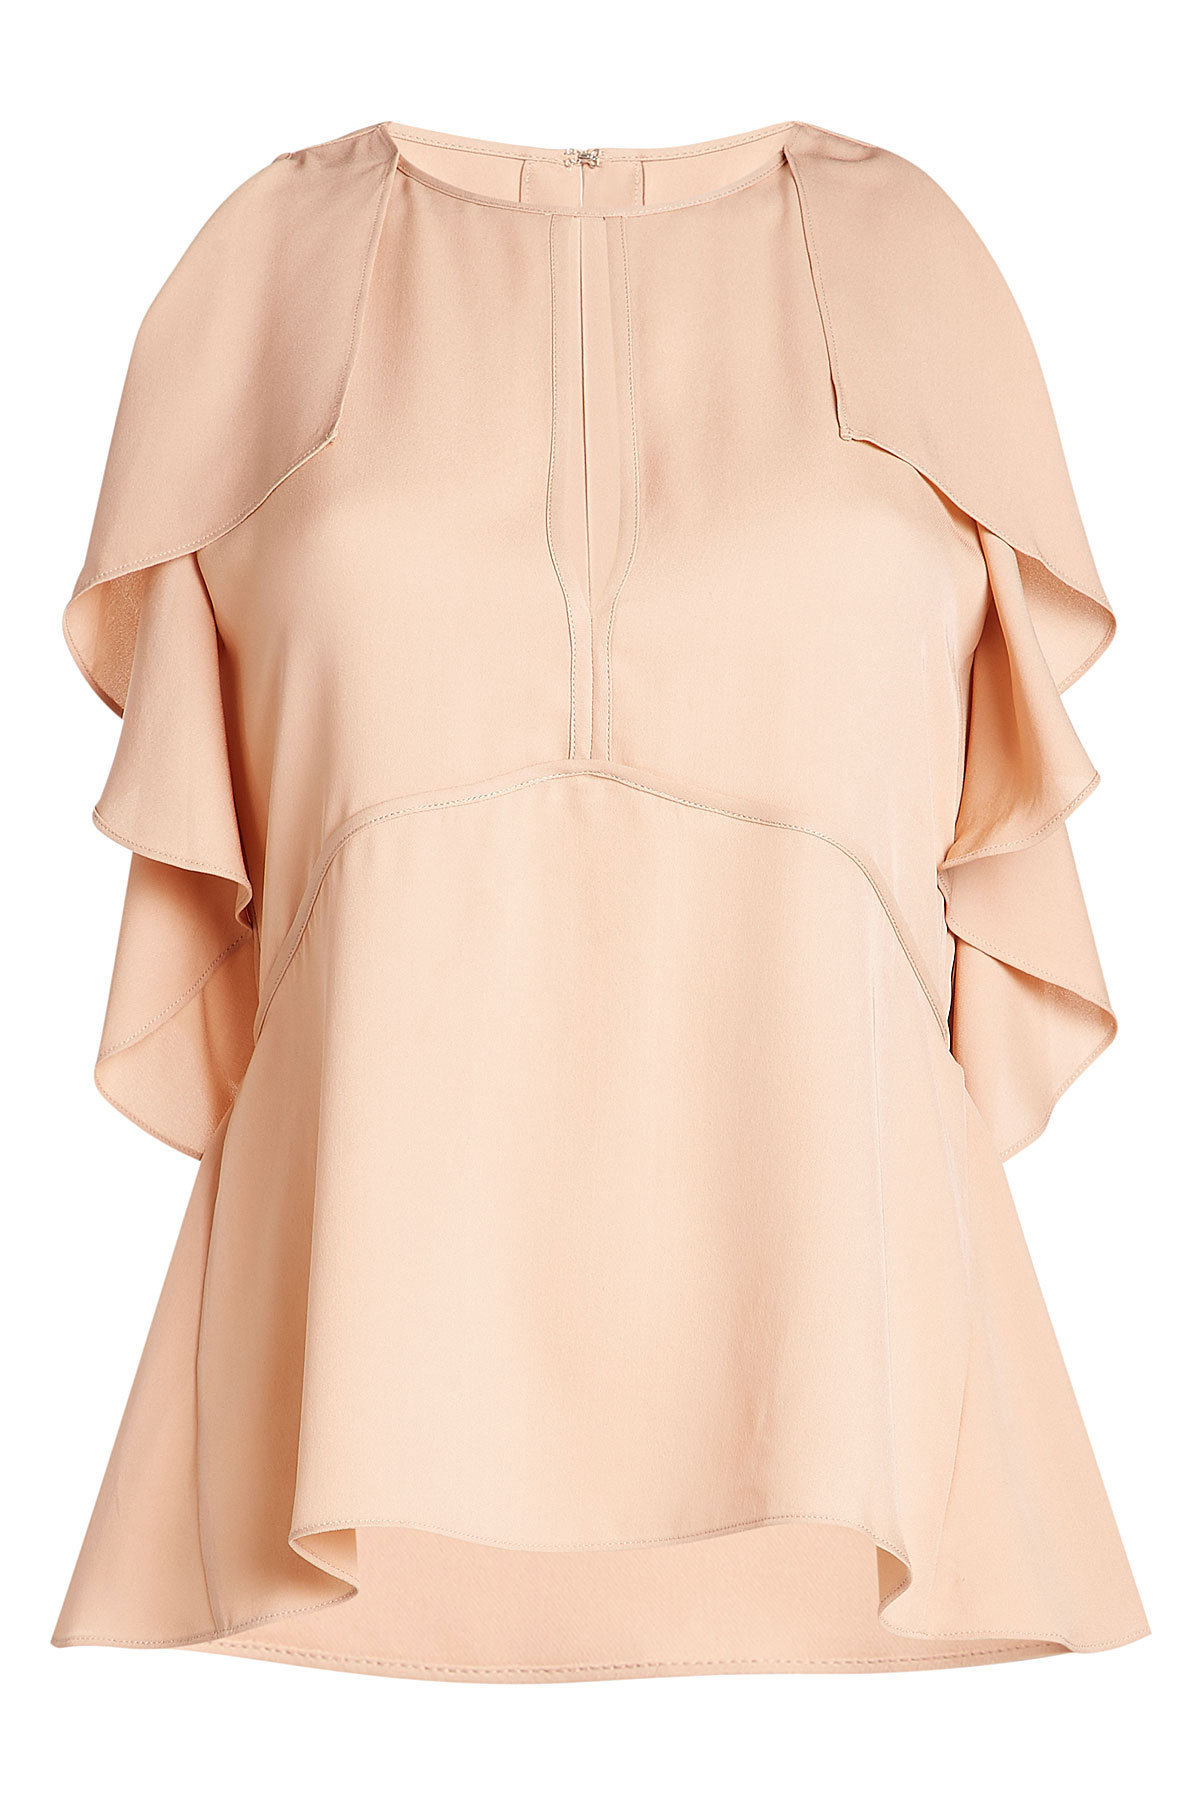 Theory - Silk Blouse with Ruffled Sleeves